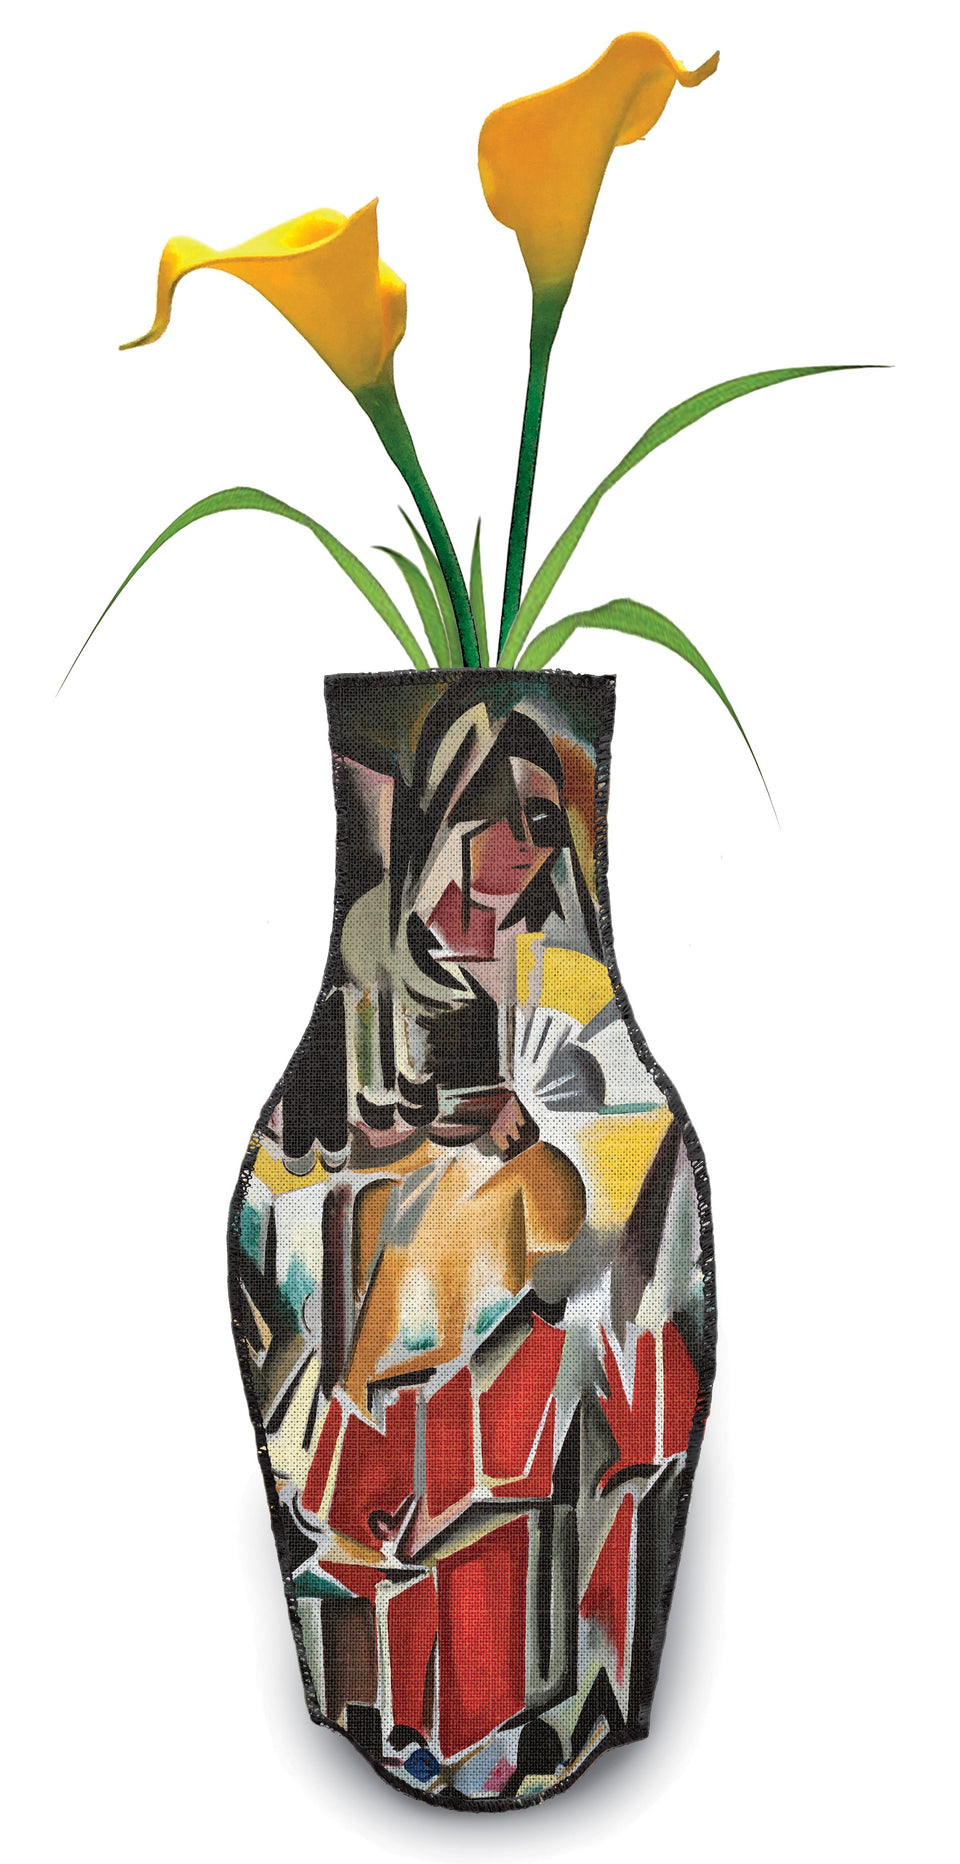 Cotton vase Lady with Fan by María Blanchard